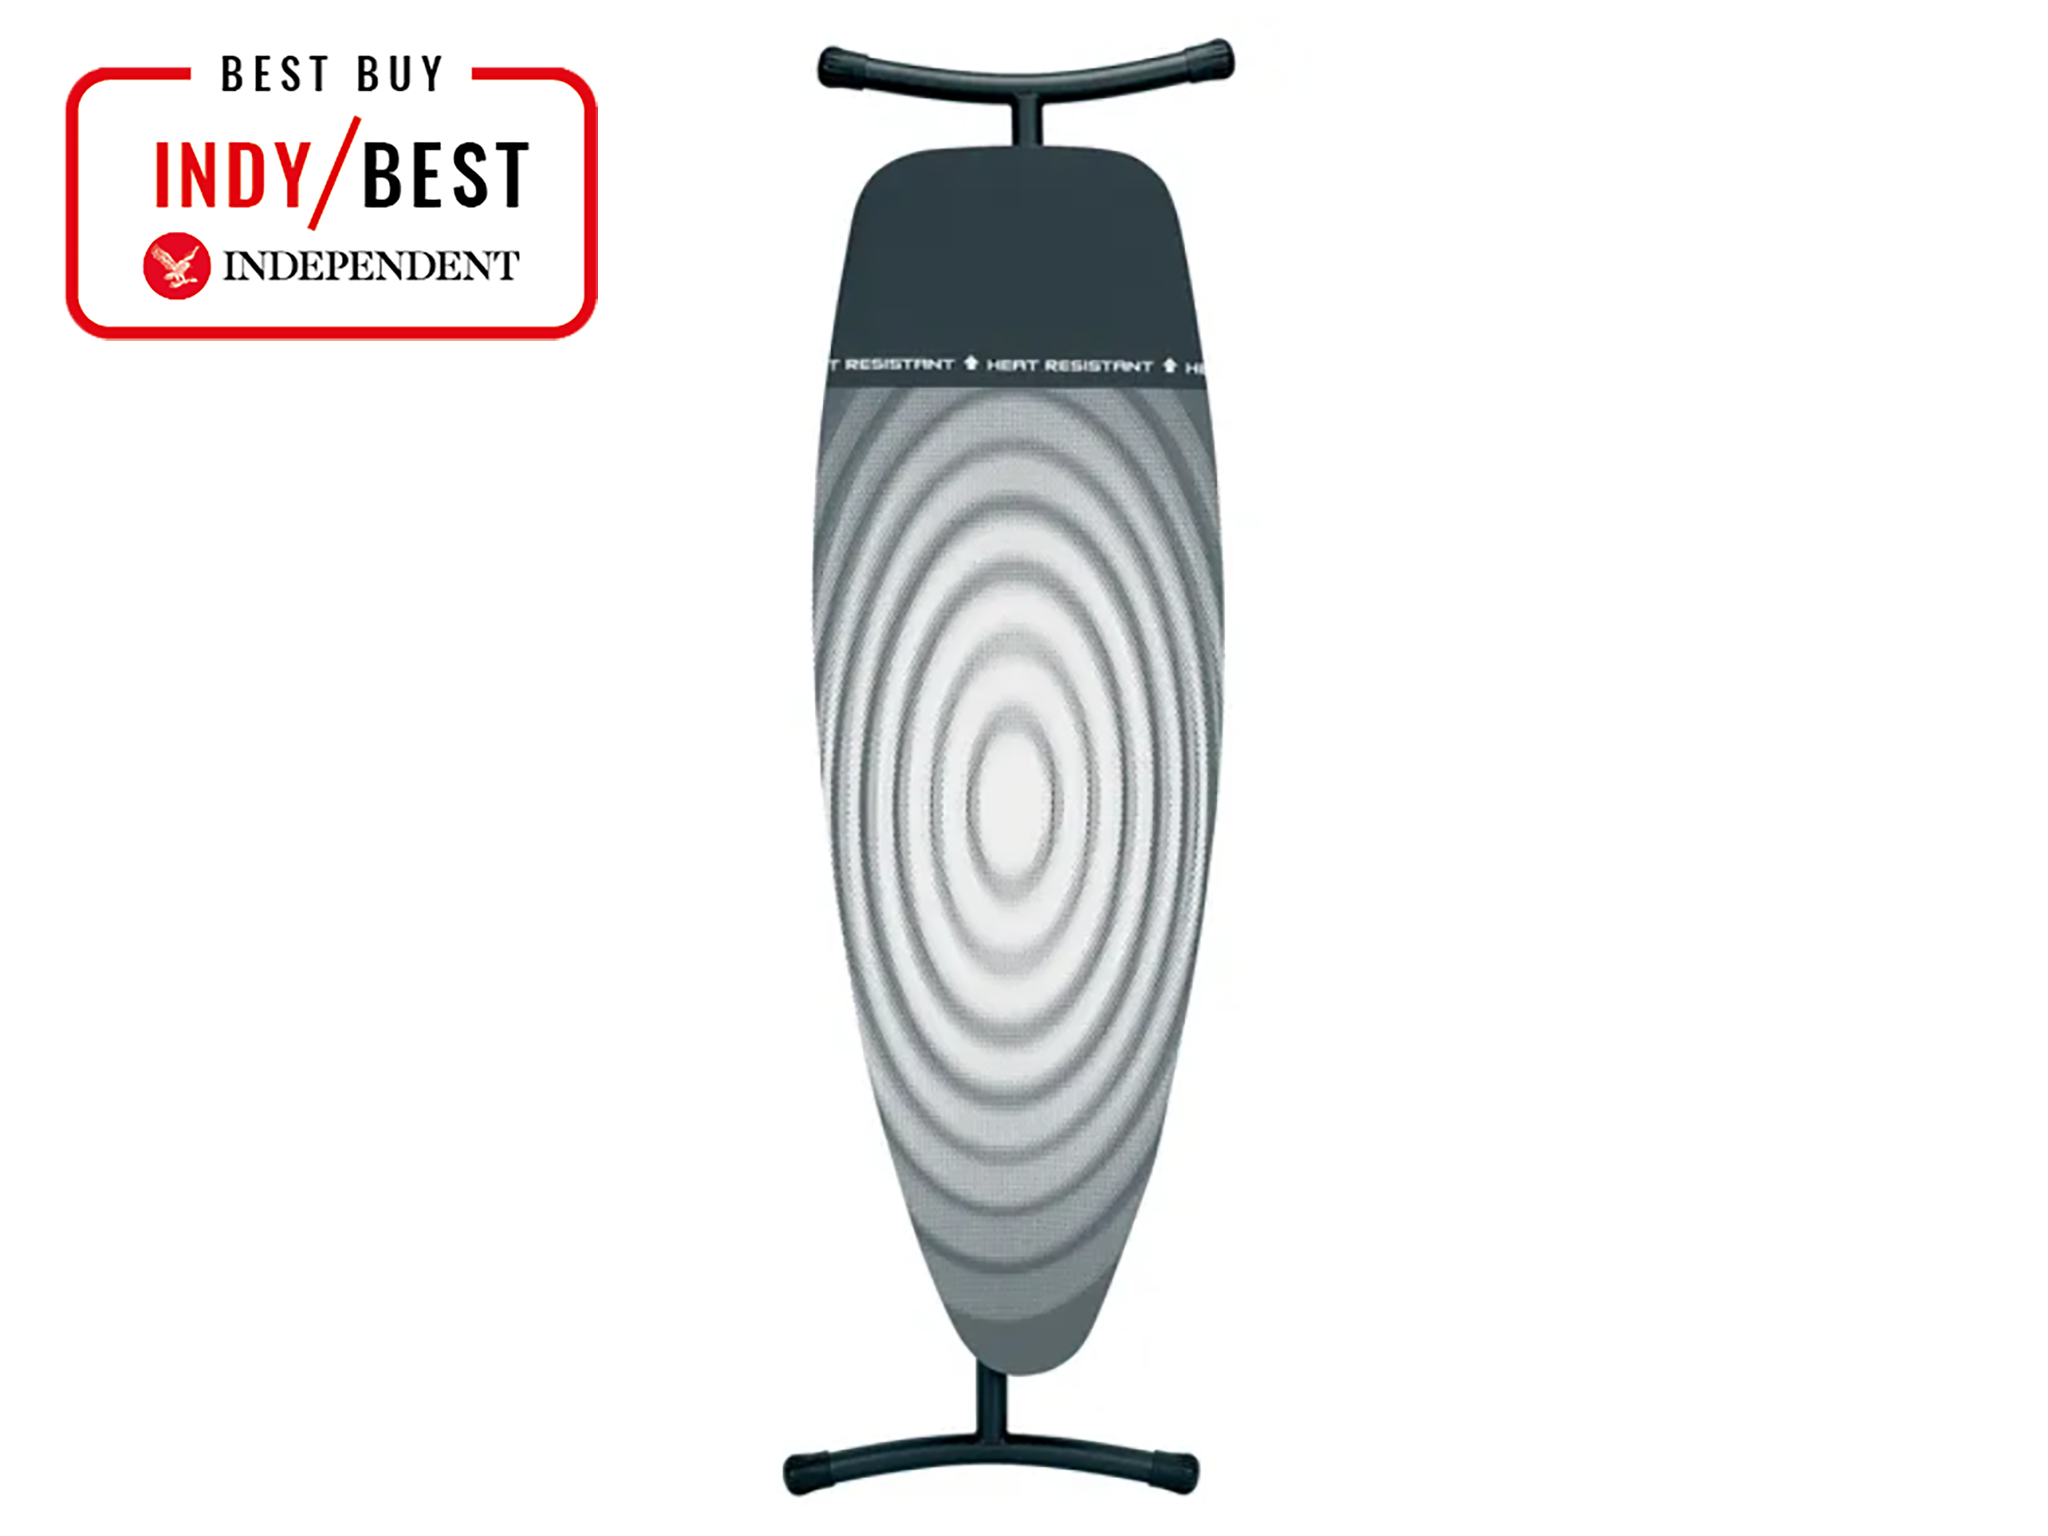 best ironing boards